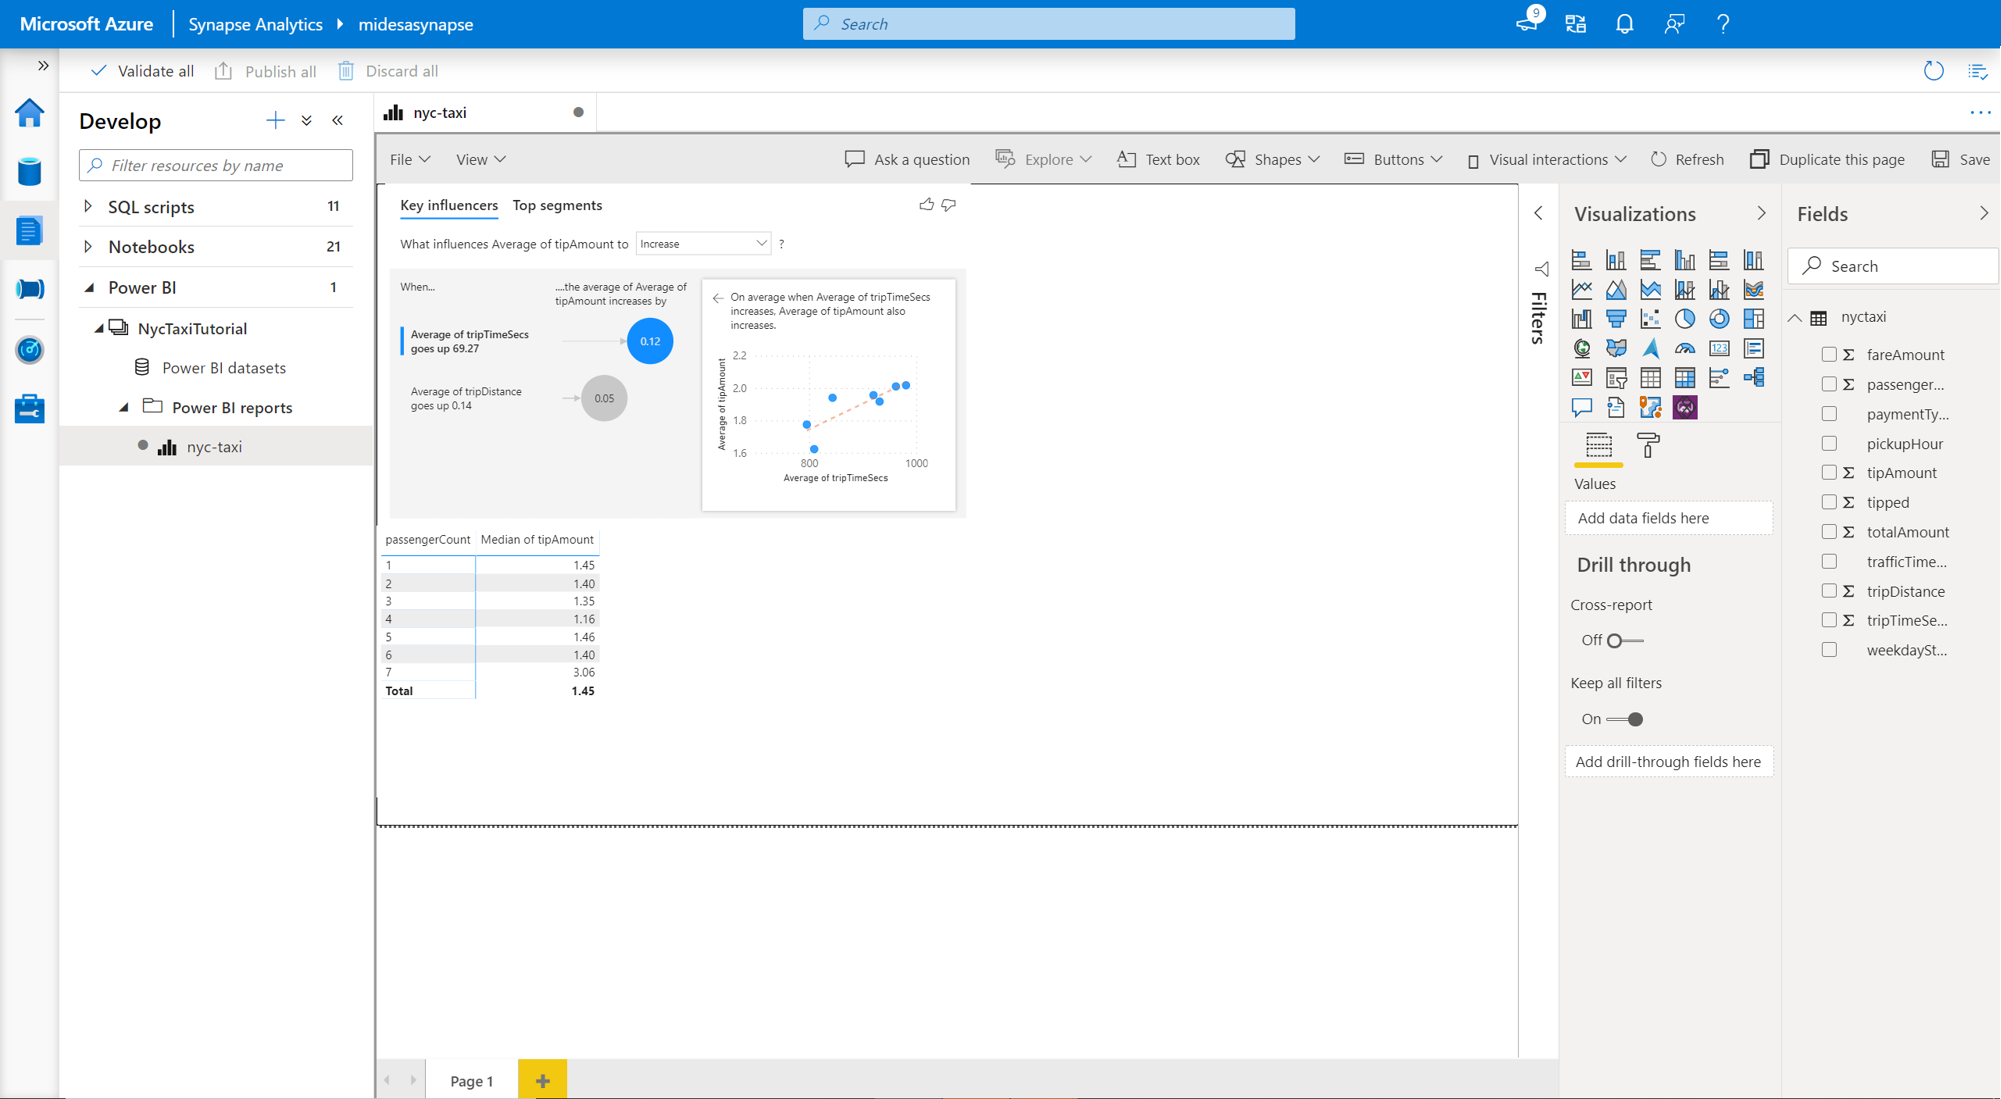 Azure Synapse Analytics in action